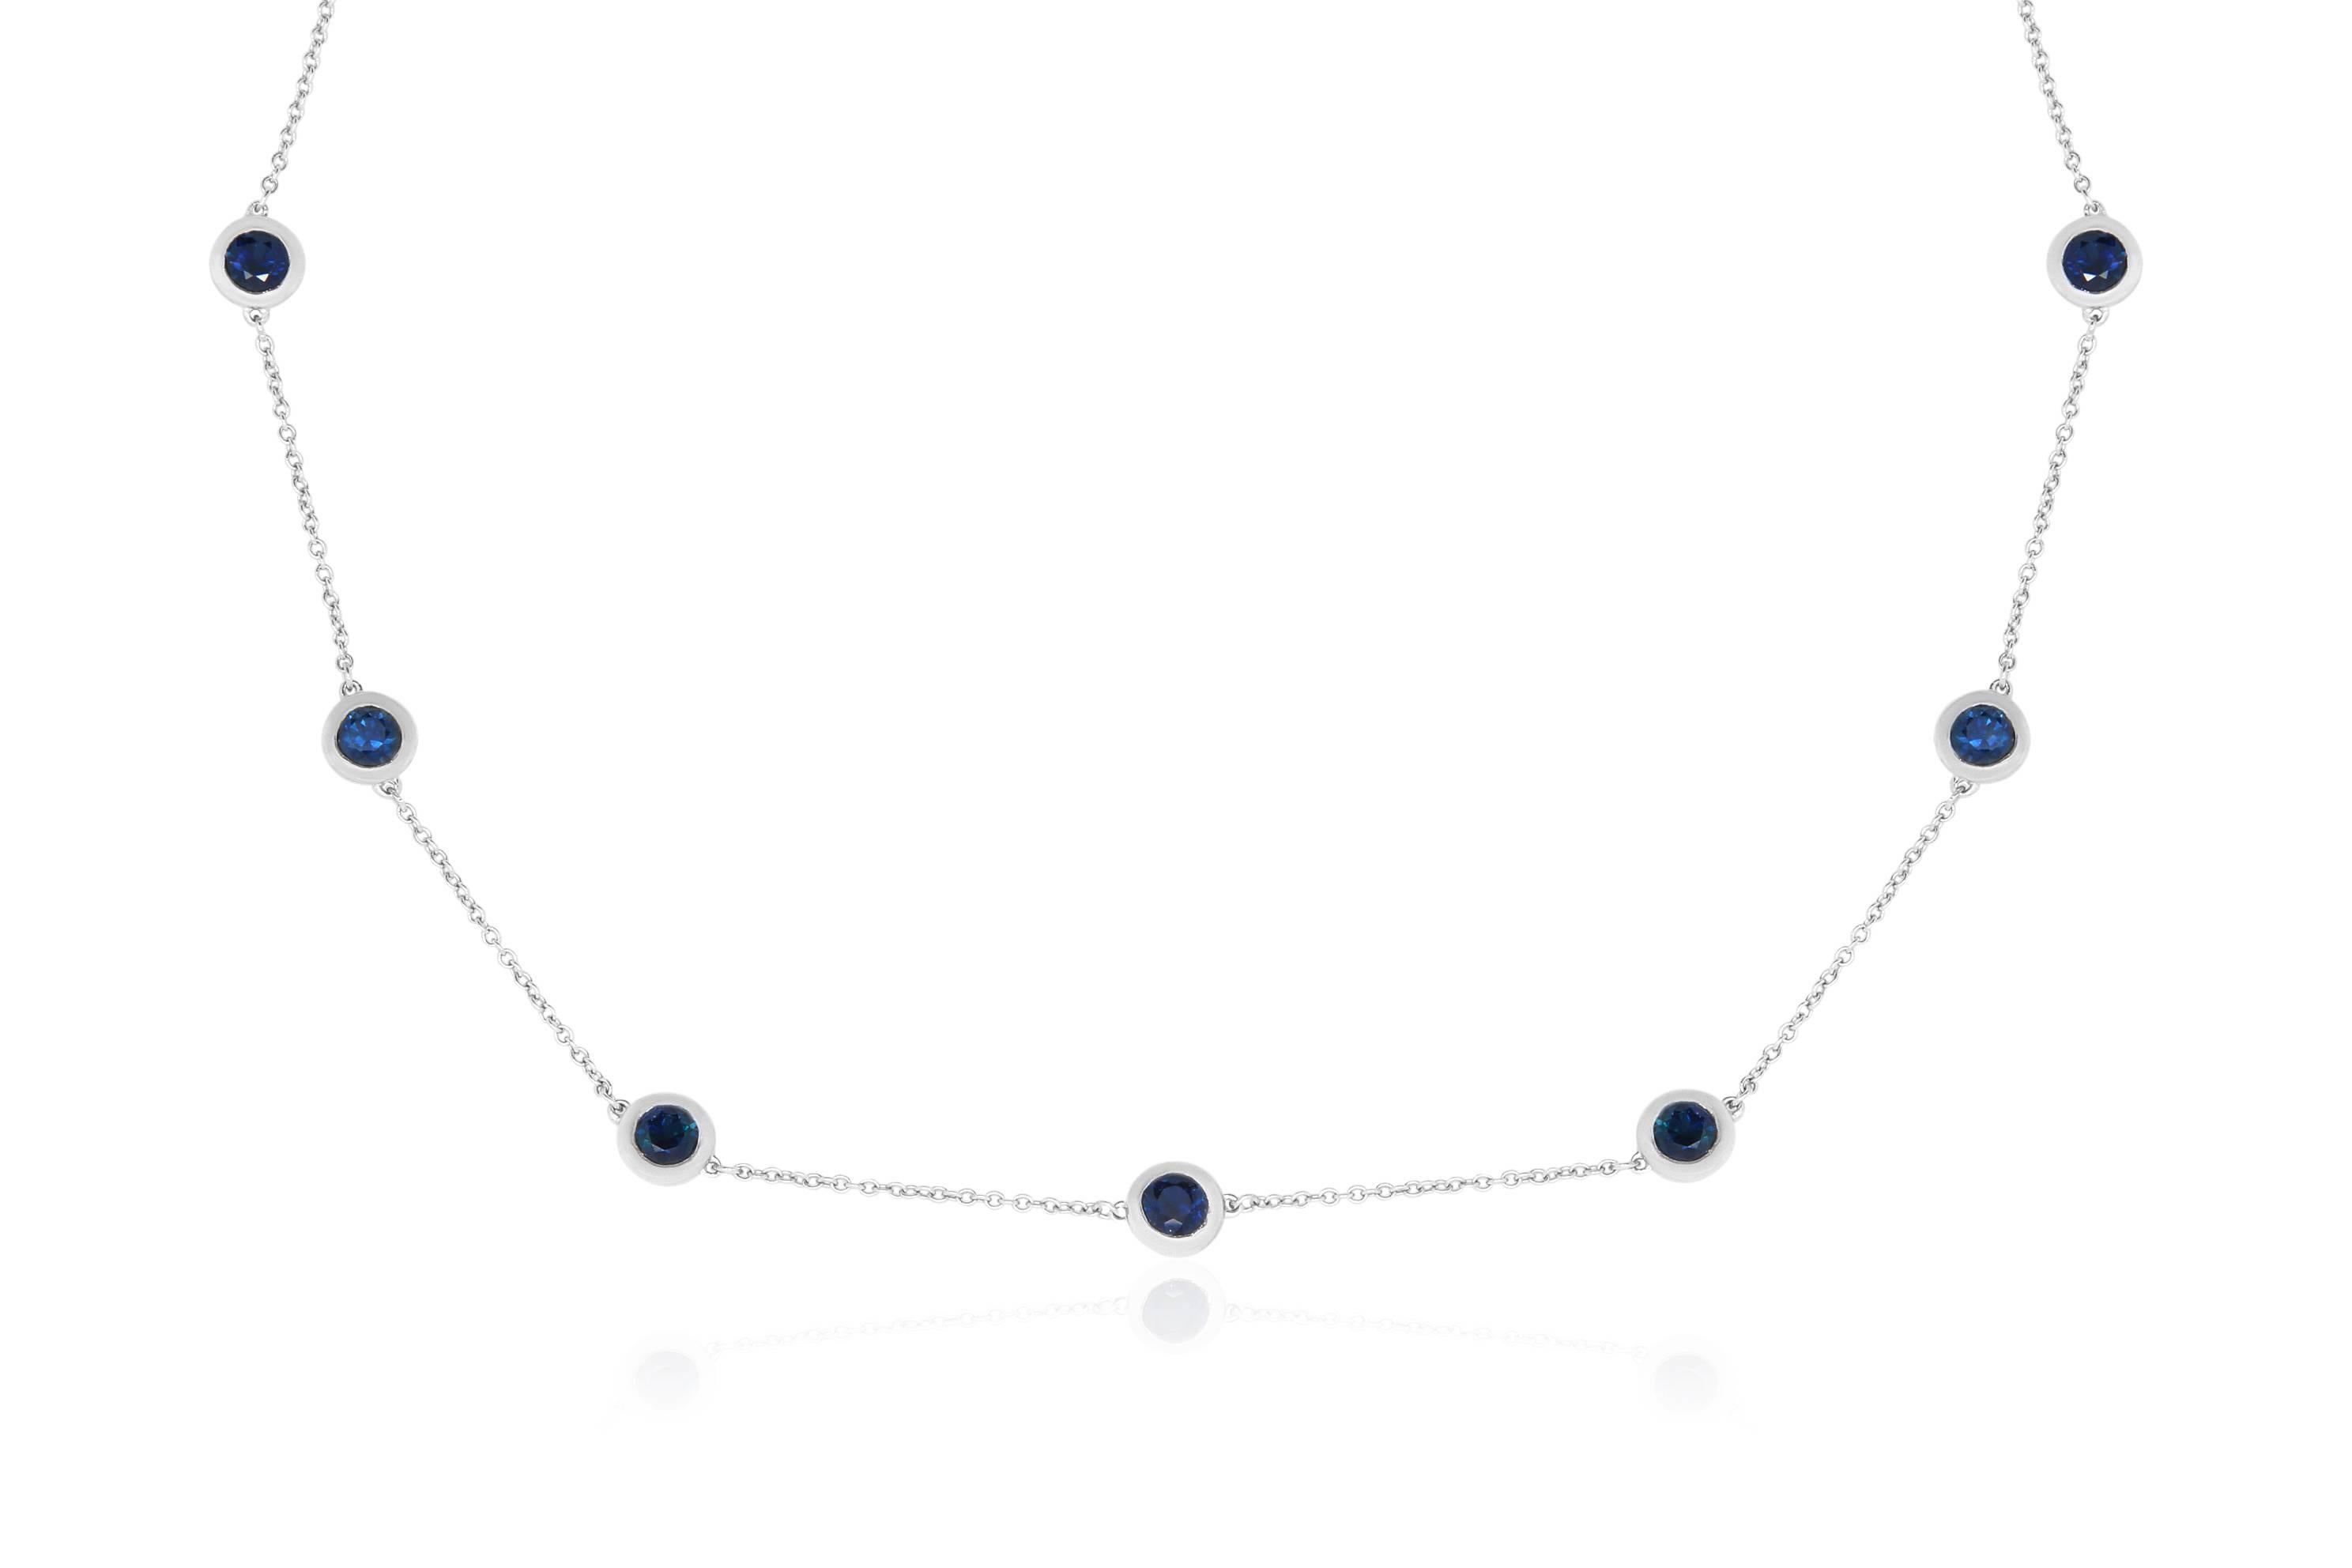 Our stunning Gemstone by the yard pieces feature beautiful round stones on a 14K white gold chain. 7 Blue Sapphires are featured weighing in at 2.44 Carats to make this piece a must have for colored jewelry lovers!

Material: 14k White Gold 
Stone